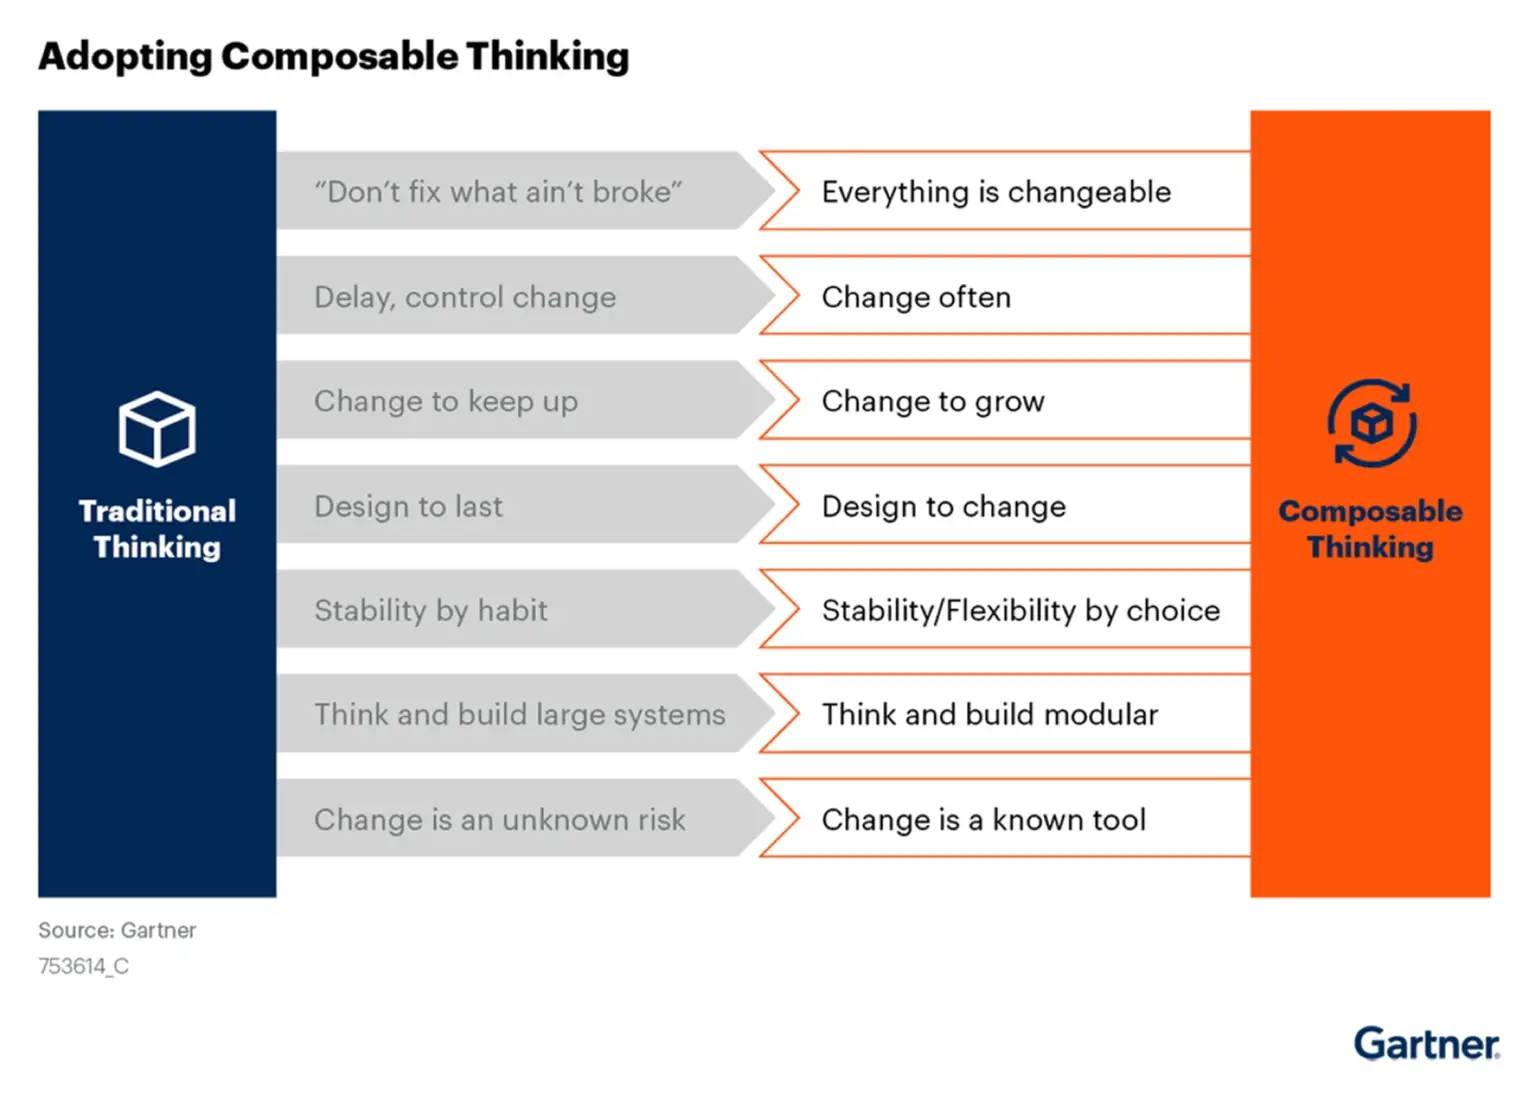 How composable thinking is different from traditional thinking